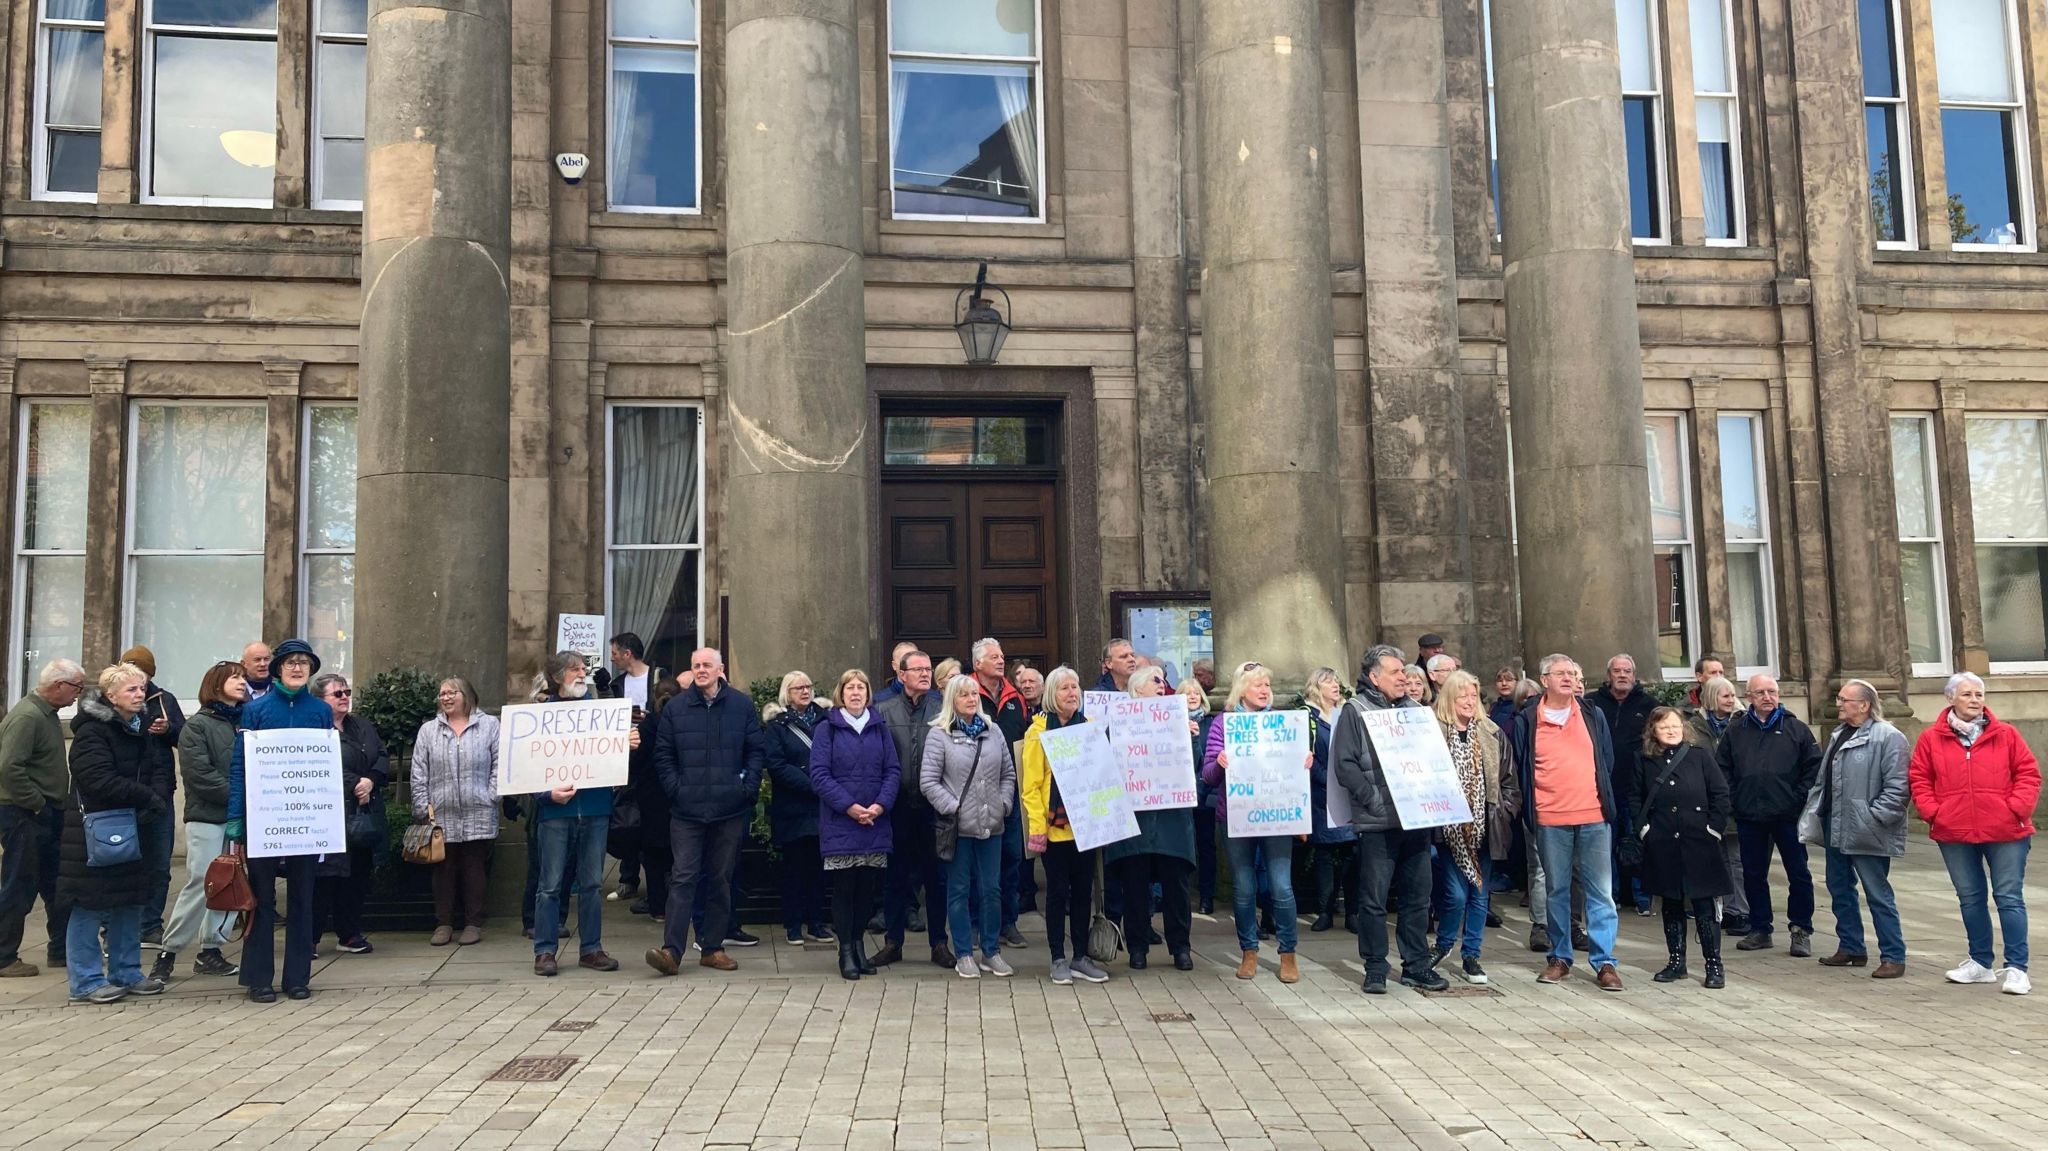 Campaigns outside Macclesfield town hall